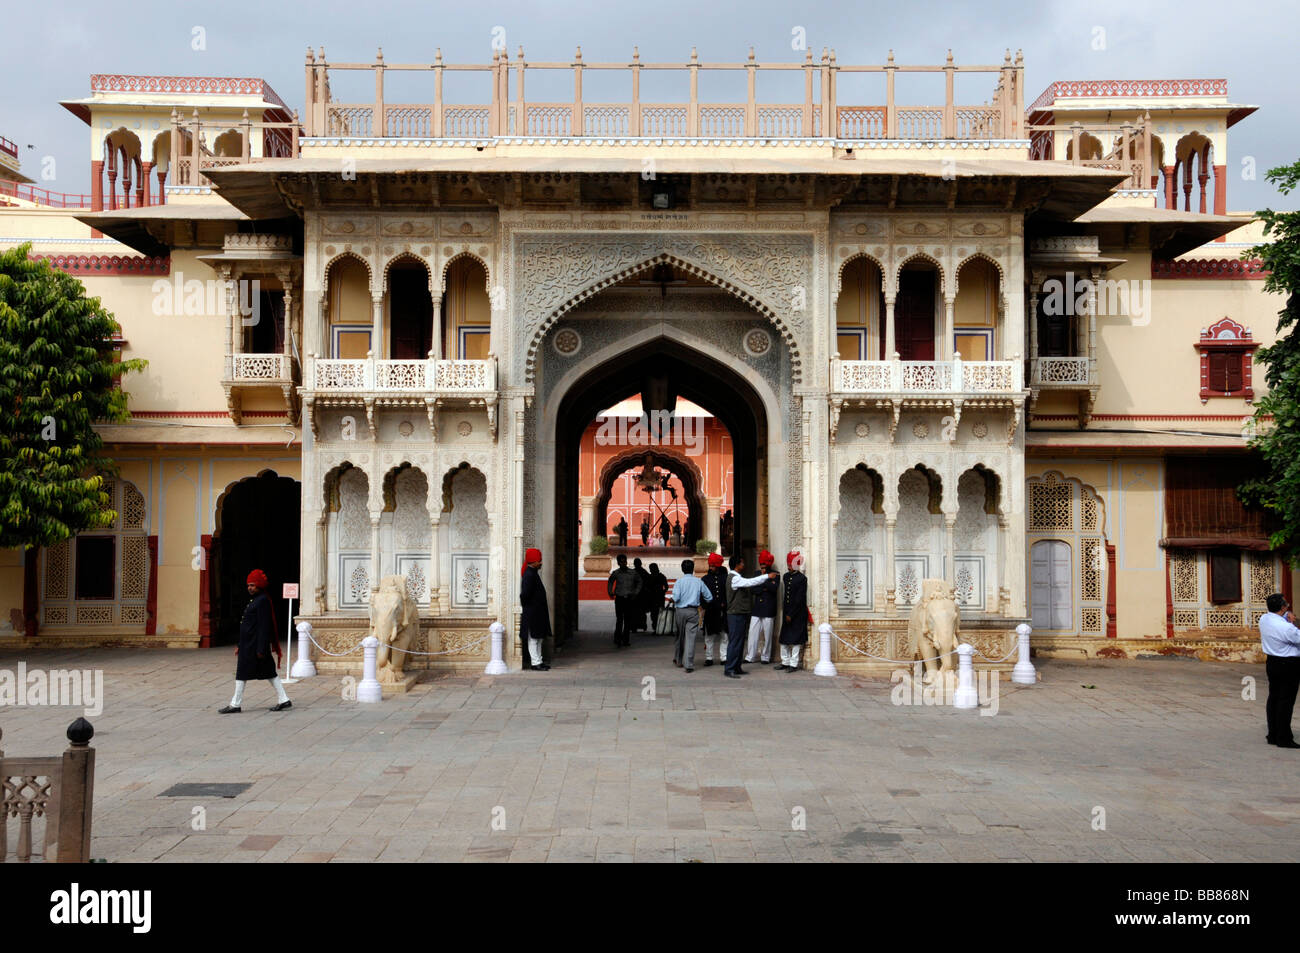 Gate to The City Palace, Jaipur, Rajasthan, North India, Asia Stock Photo